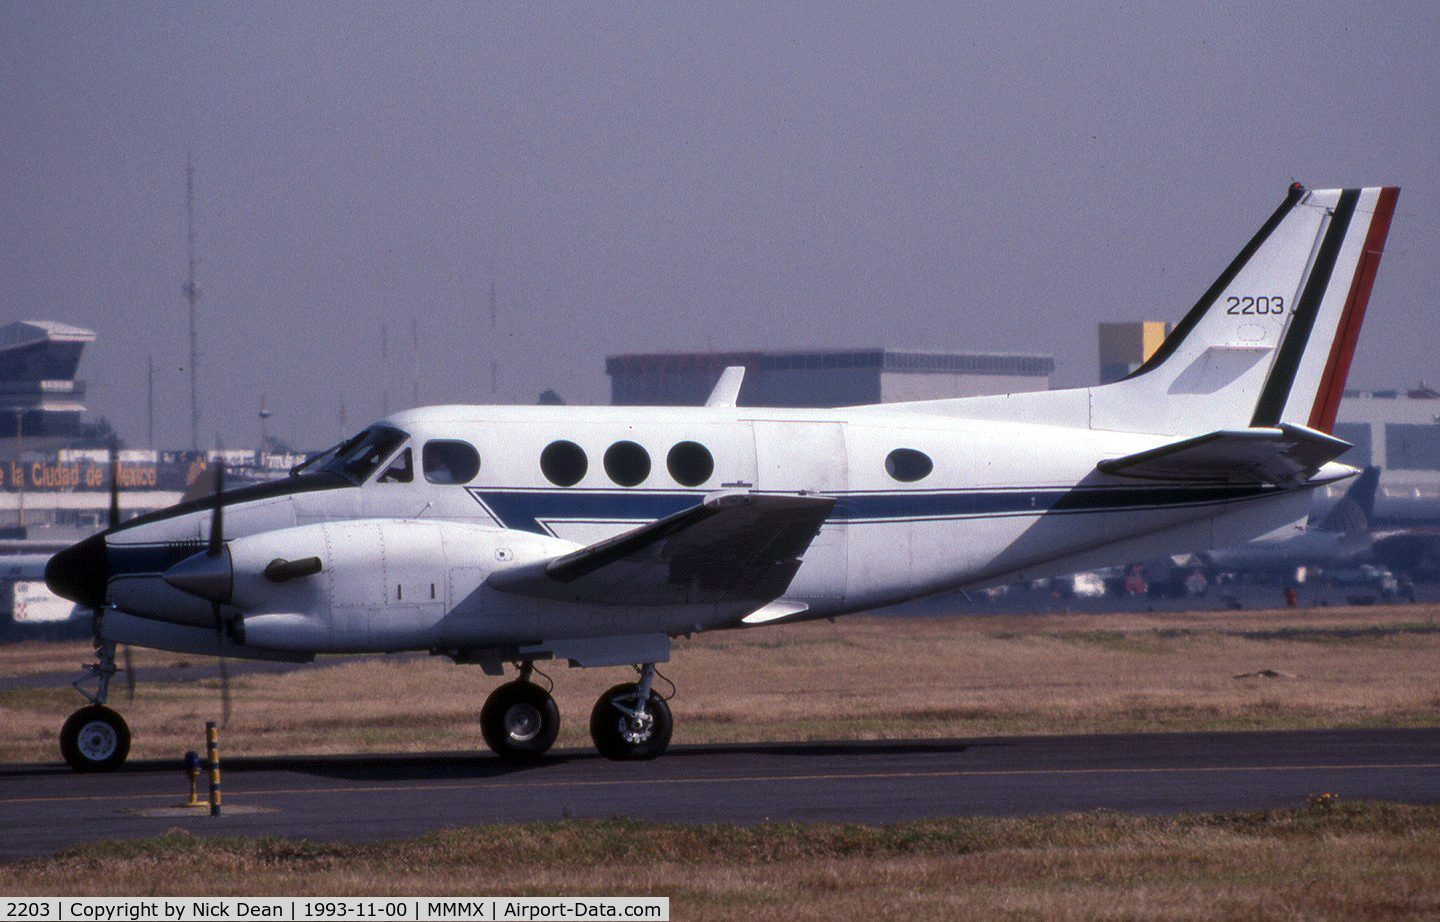 2203, 1988 Beech C90A King Air King Air C/N LJ-1171, Re registered 5203 still with the Govt of Mexico